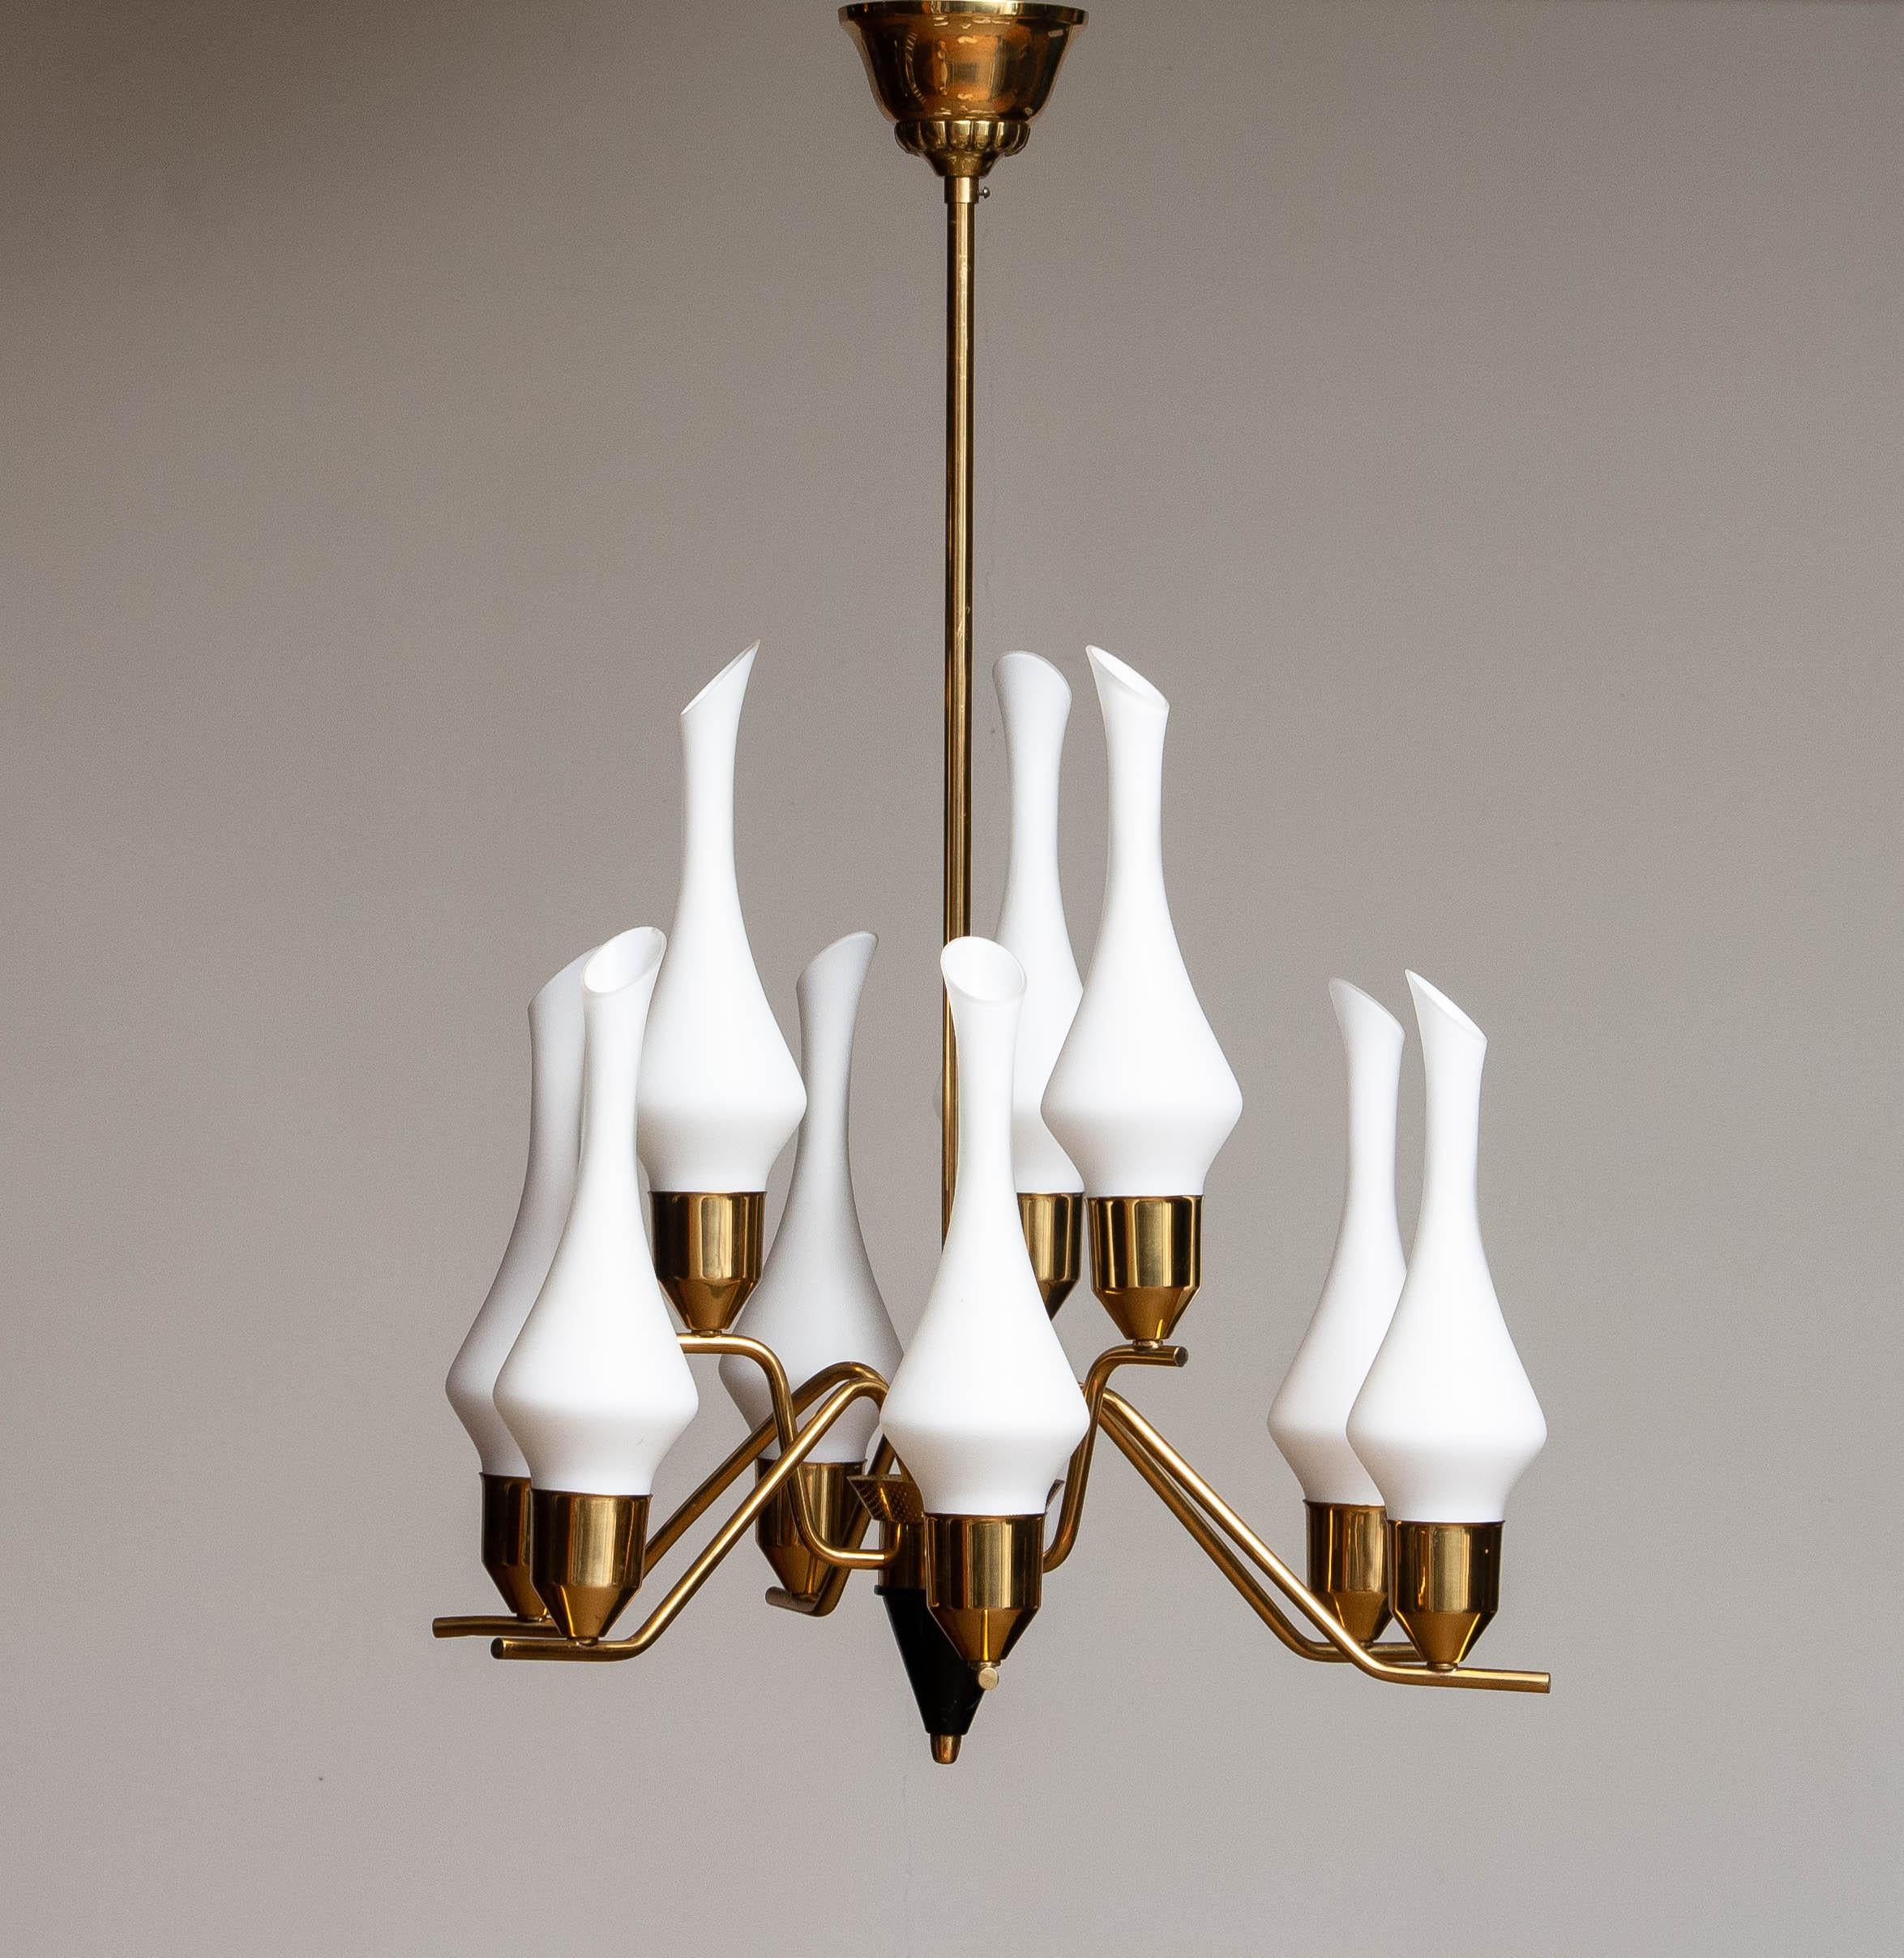 1960's Swedish Brass Chandelier with White Frosted Organic Glass Vases, ASEA 2